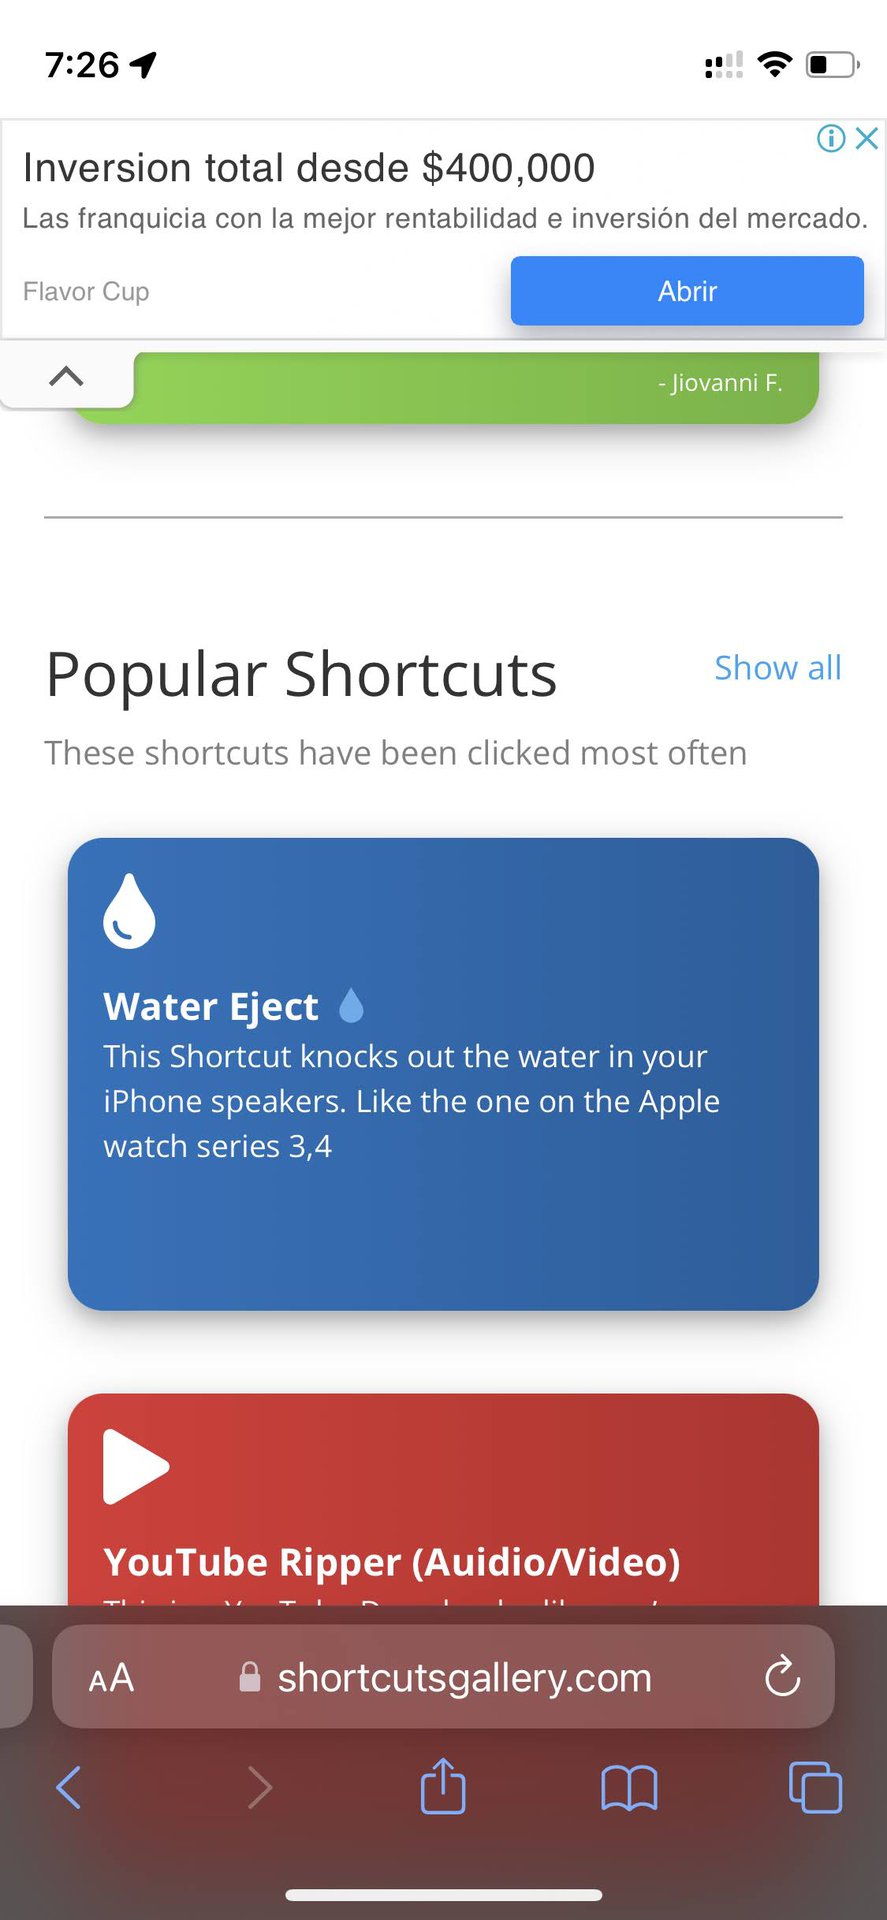 Water Eject Shortcut on iPhone 2